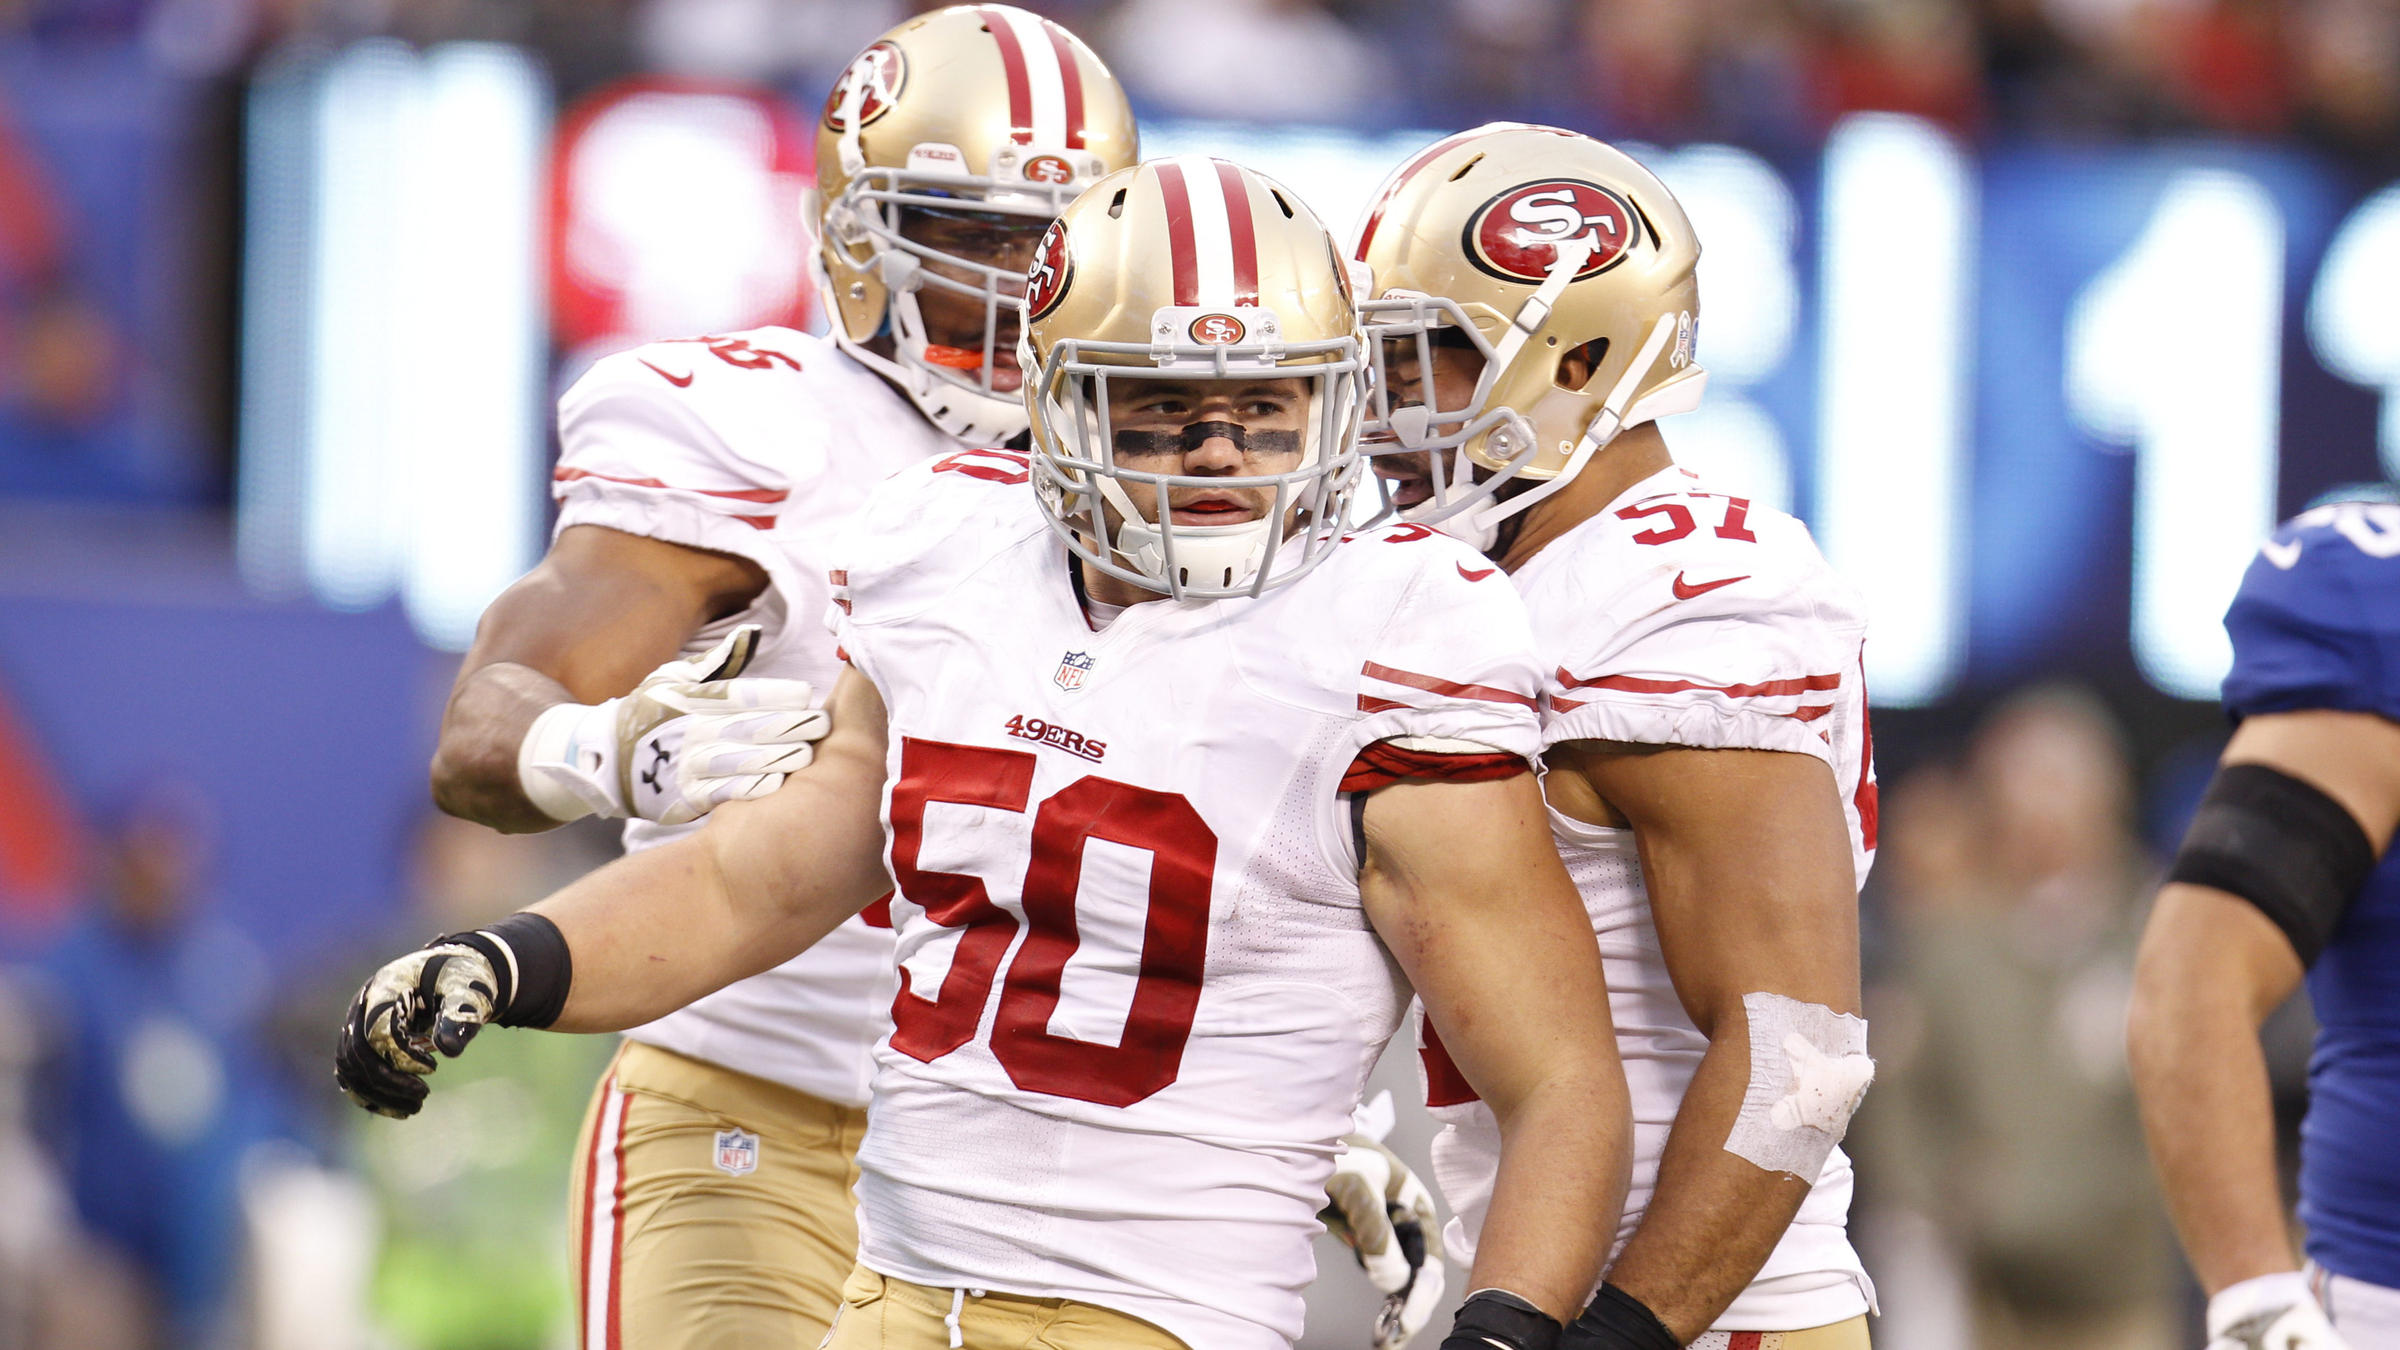 49ers Linebacker Quits After 1 Season, Citing Safety Concerns